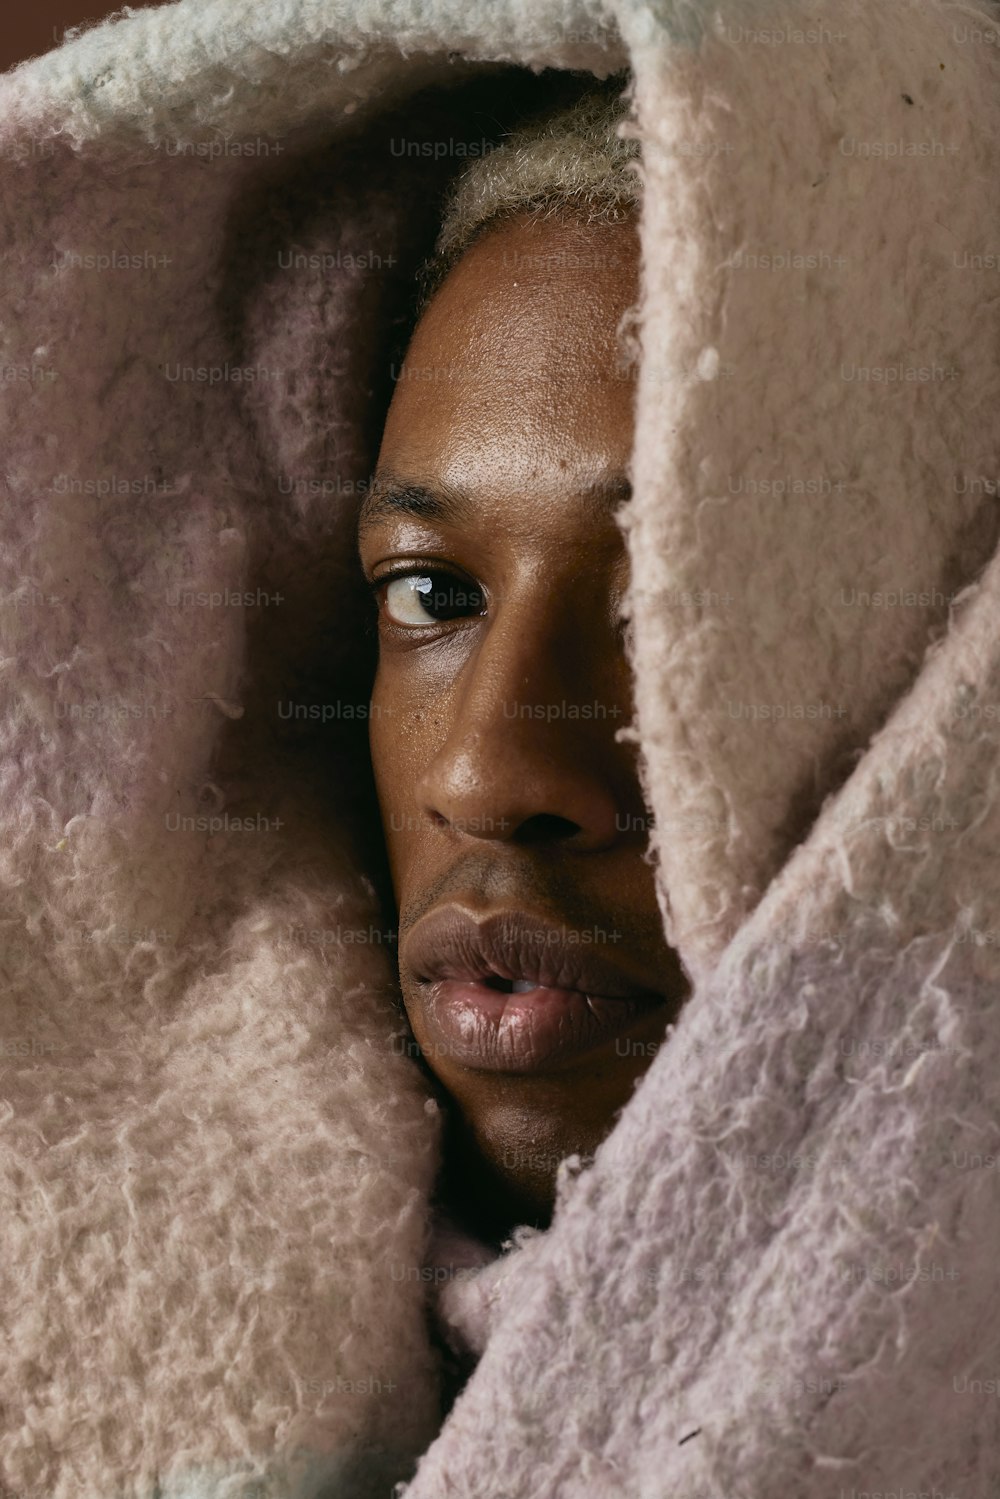 a close up of a person under a blanket